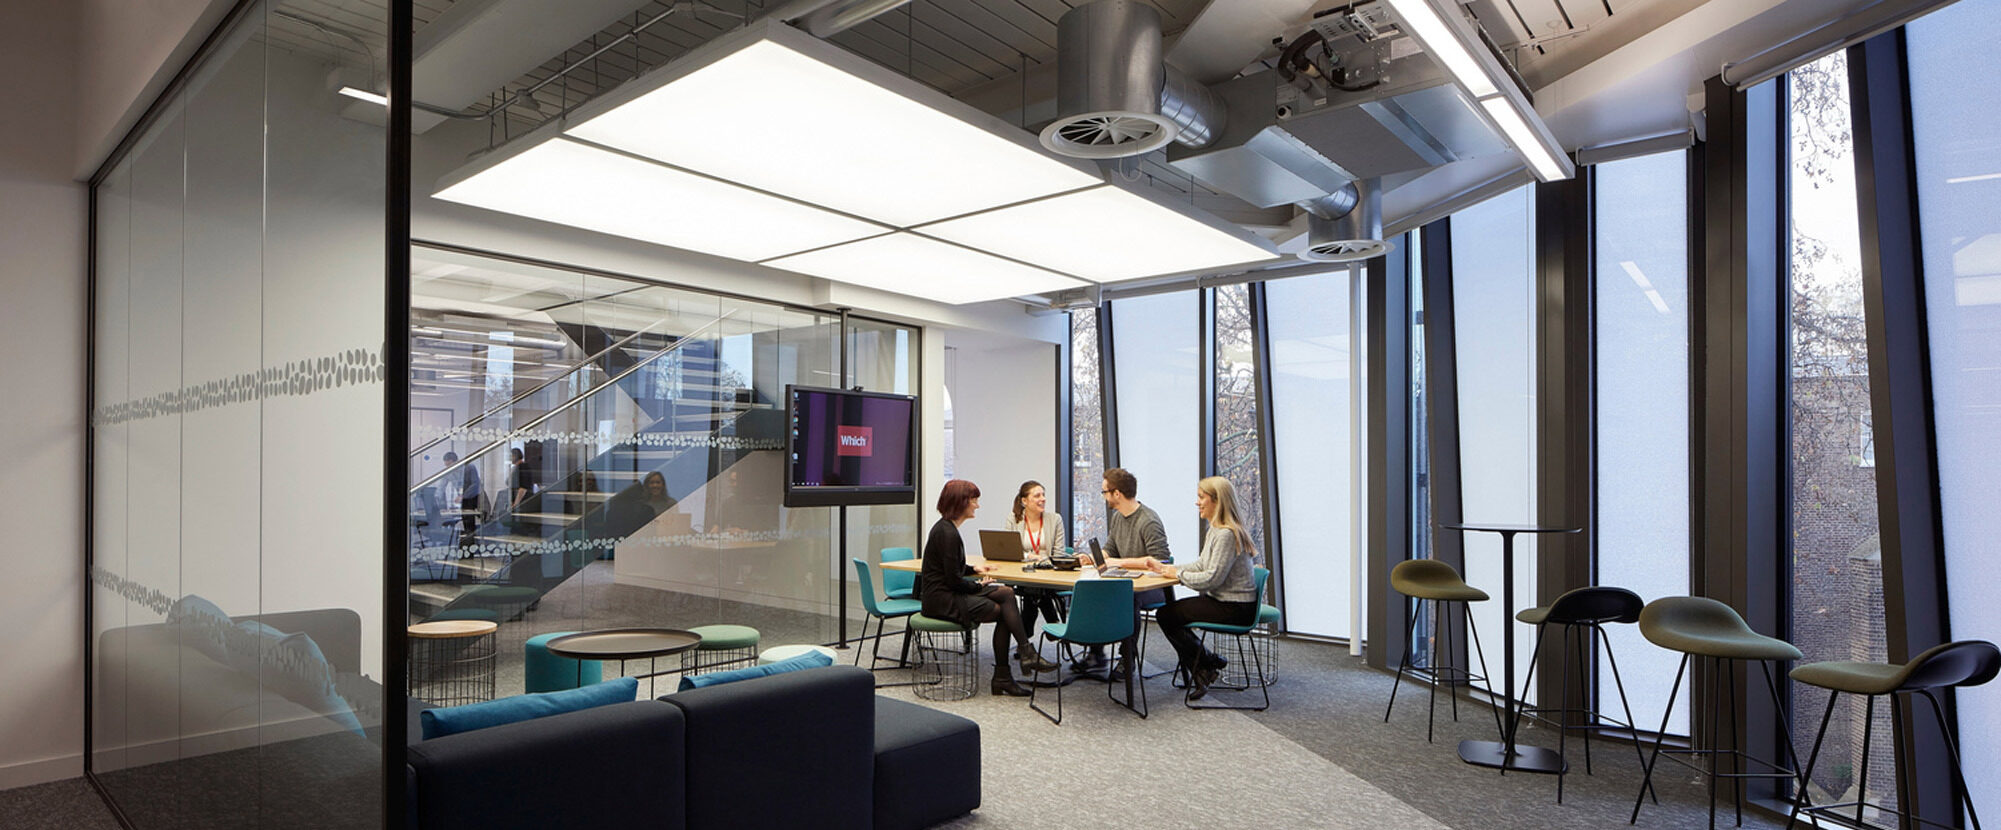 Modern office meeting area with expansive windows, natural light, and a sleek glass partition. Sleek bar stools complement a high table, while a cozy blue sofa encircles a lower wooden table, fostering a collaborative atmosphere.